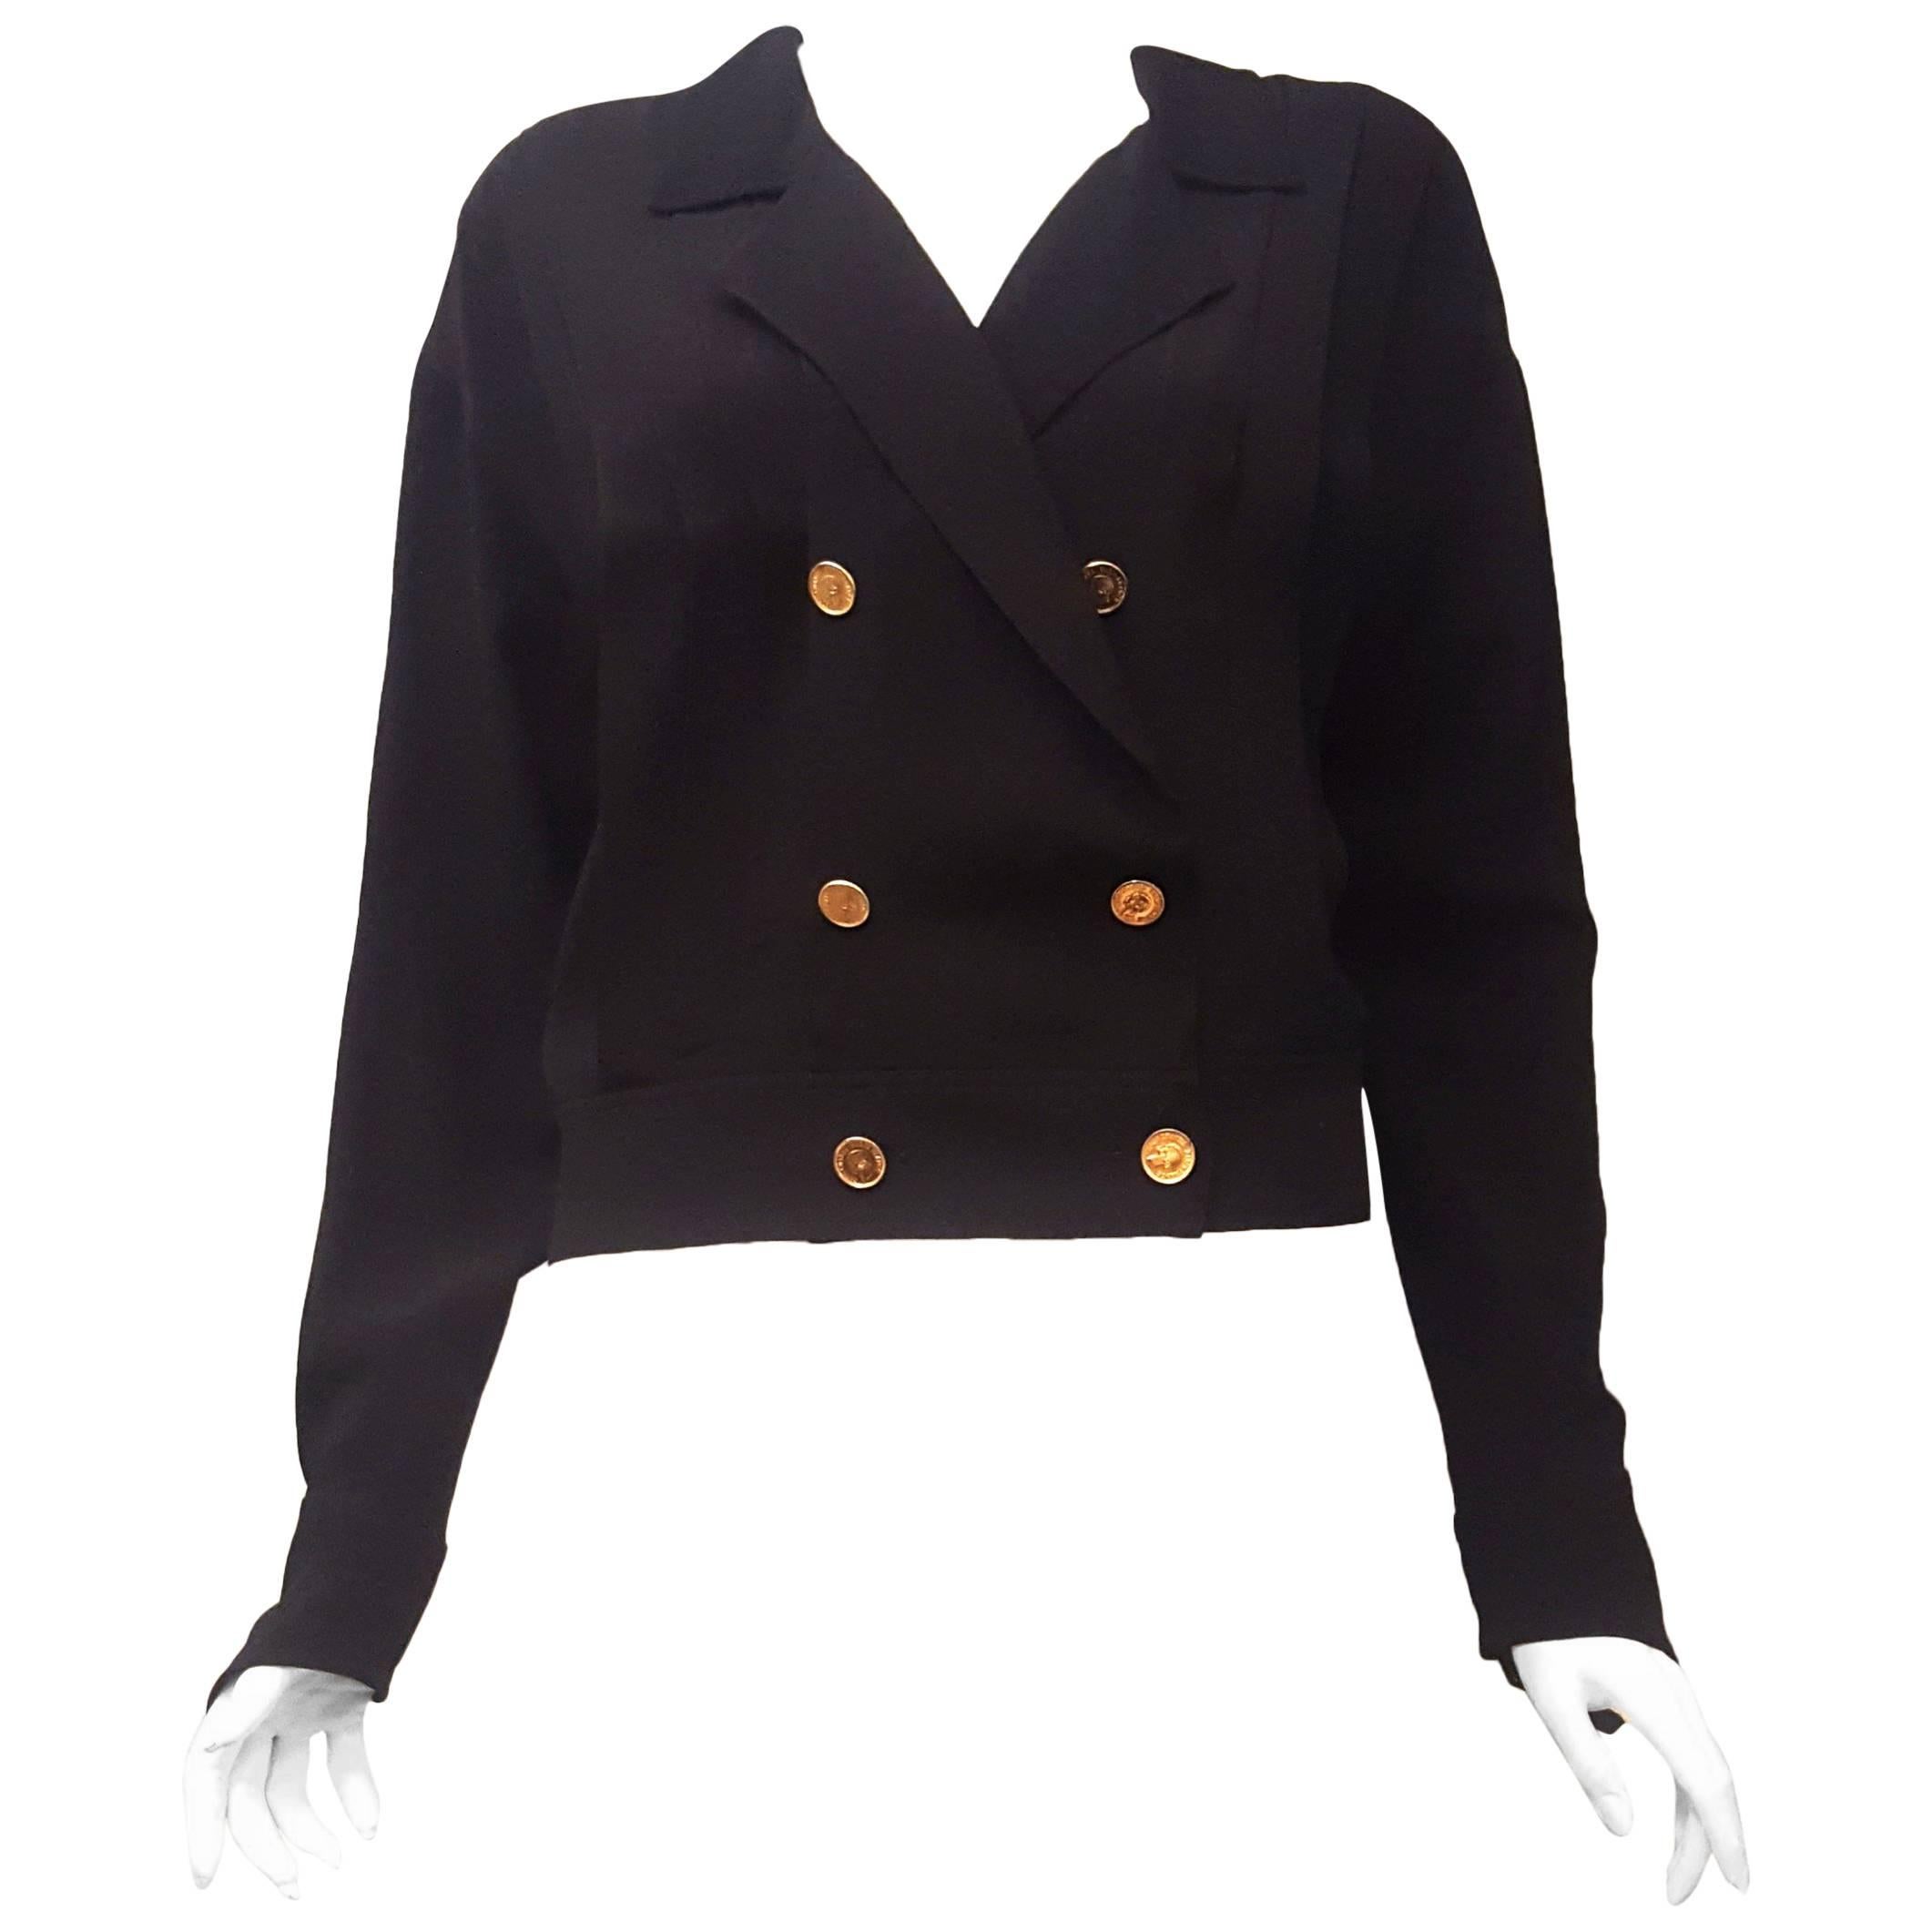 Chanel Black Silk Bomber Style Jacket with Gold Tone Coco Chanel Logo Buttons